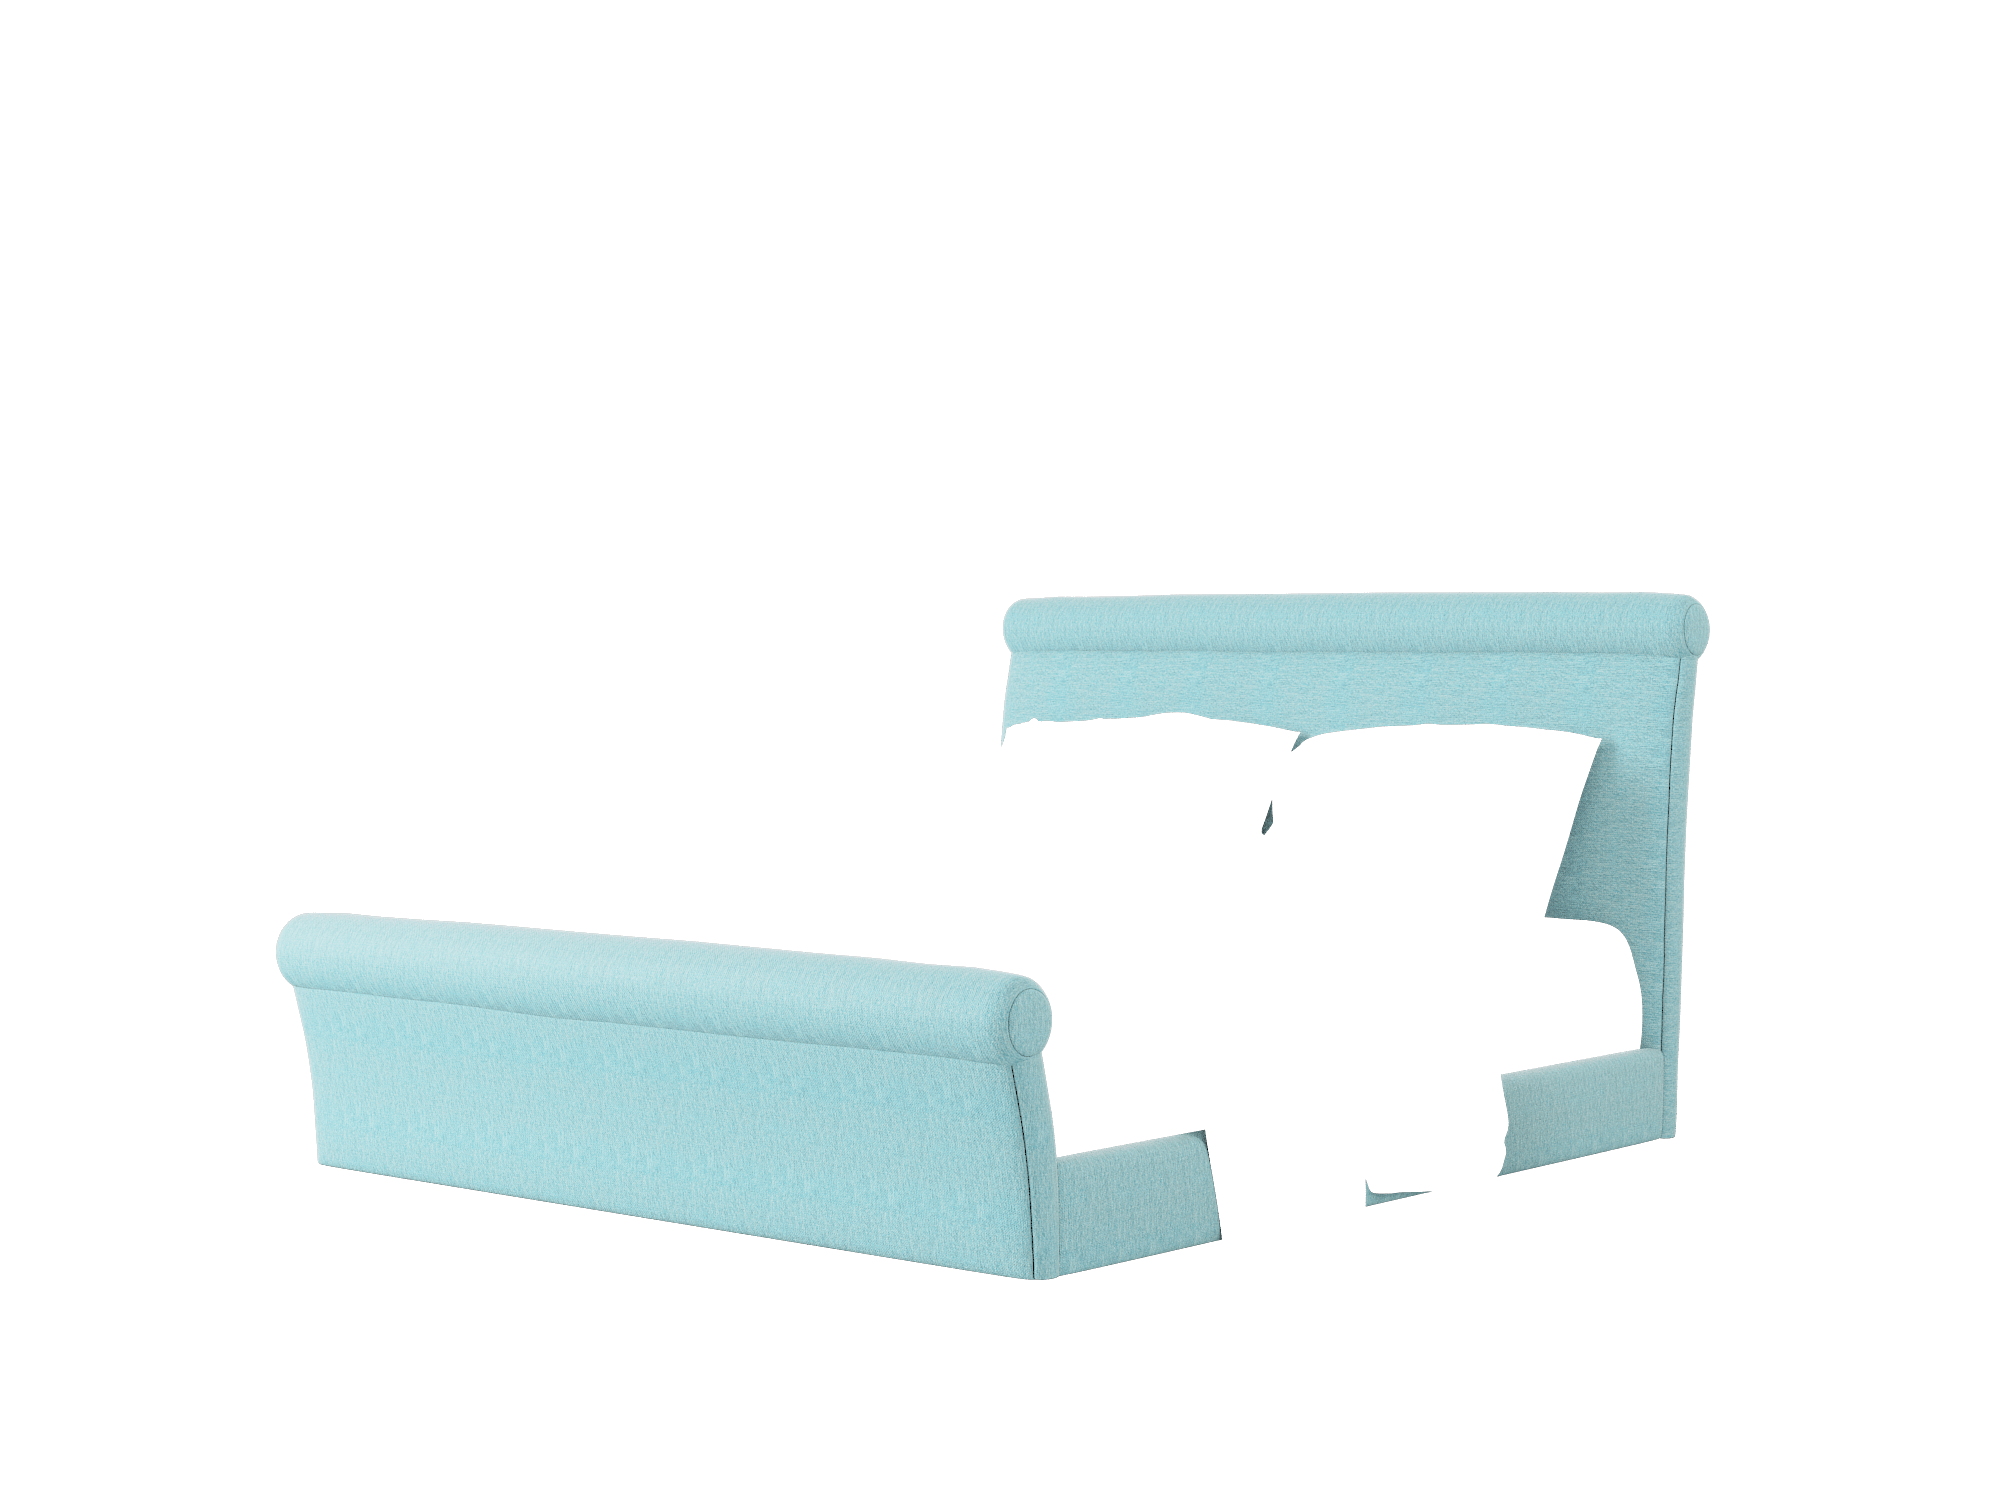 Maja Cosmo Turquoise Bed King Room Texture